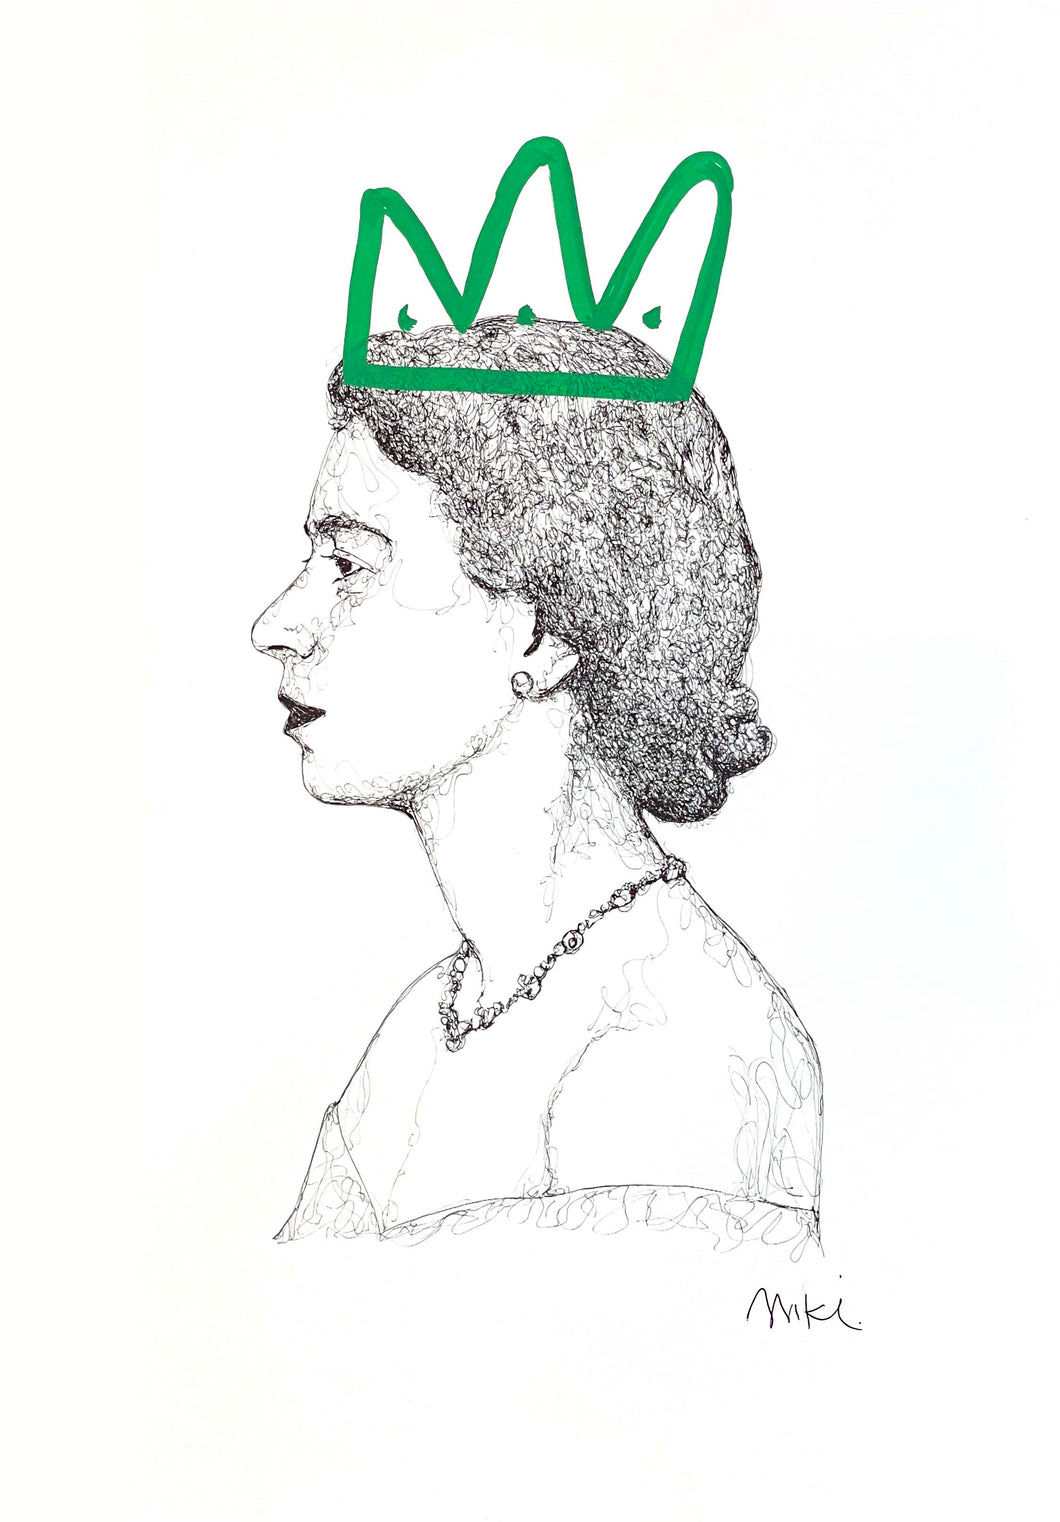 Niki Crafford - One Line Drawing - Her Majesty - Green Crown